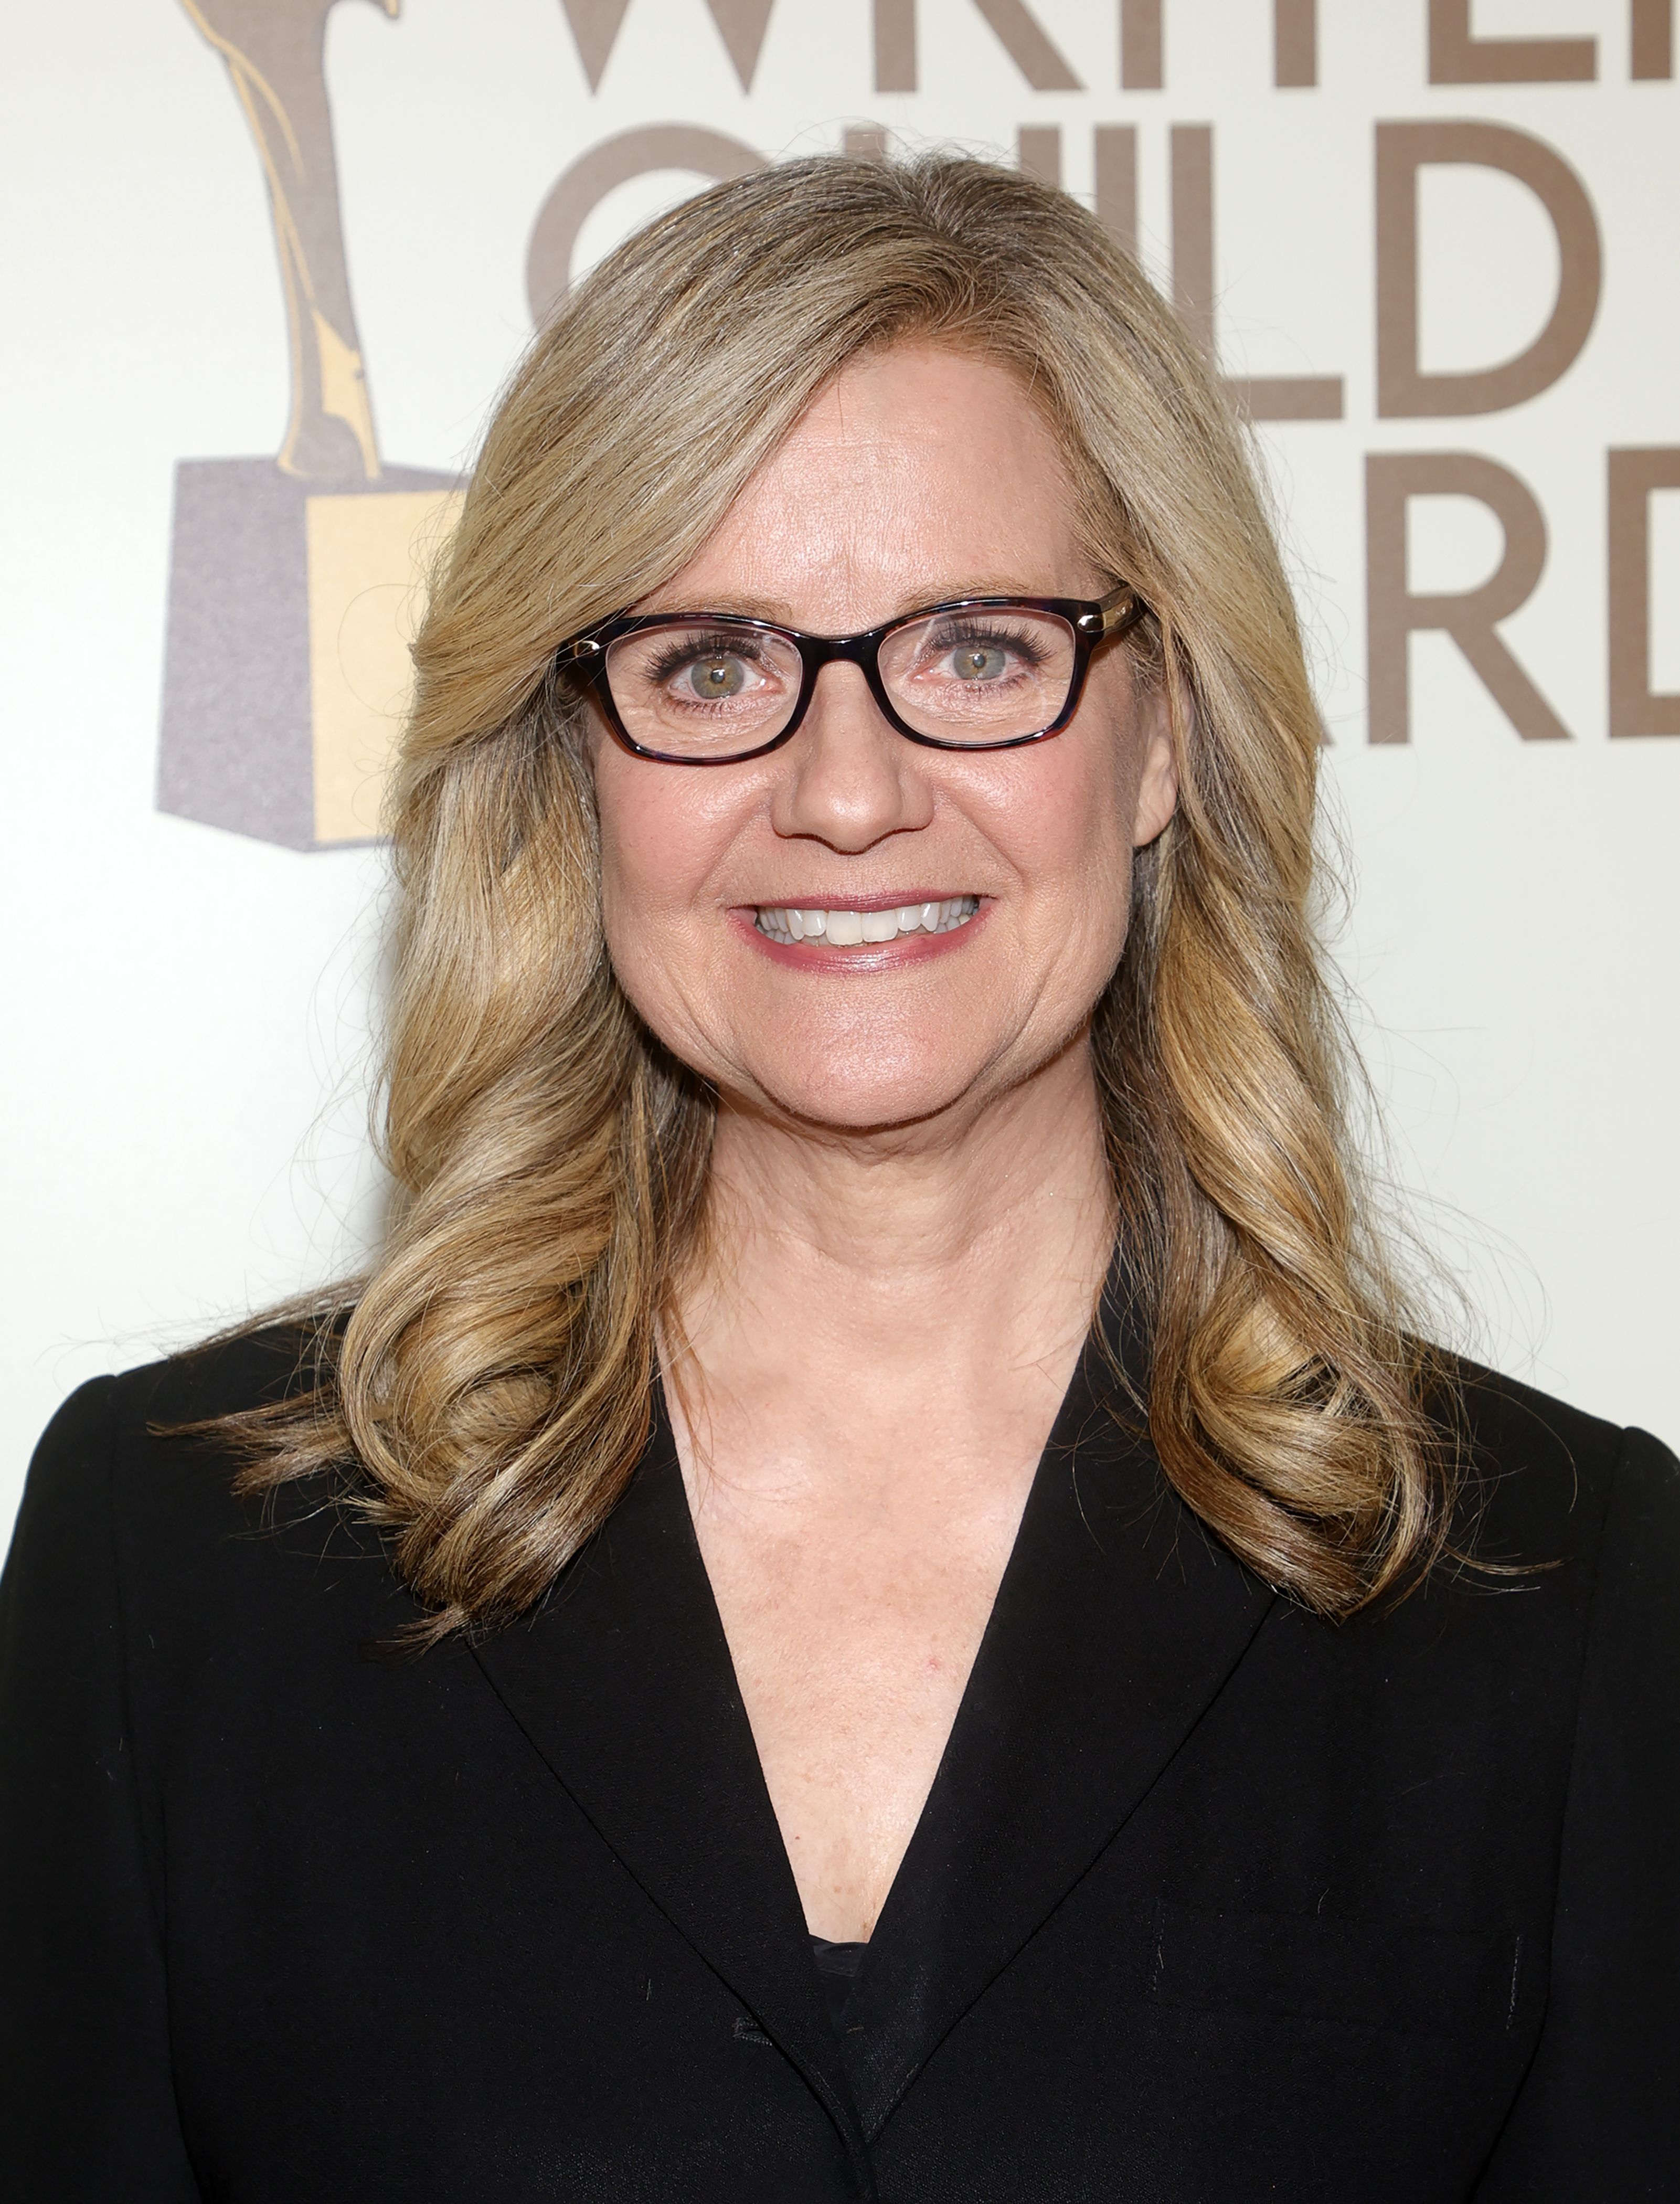 Where is Bonnie Hunt now in 2023?